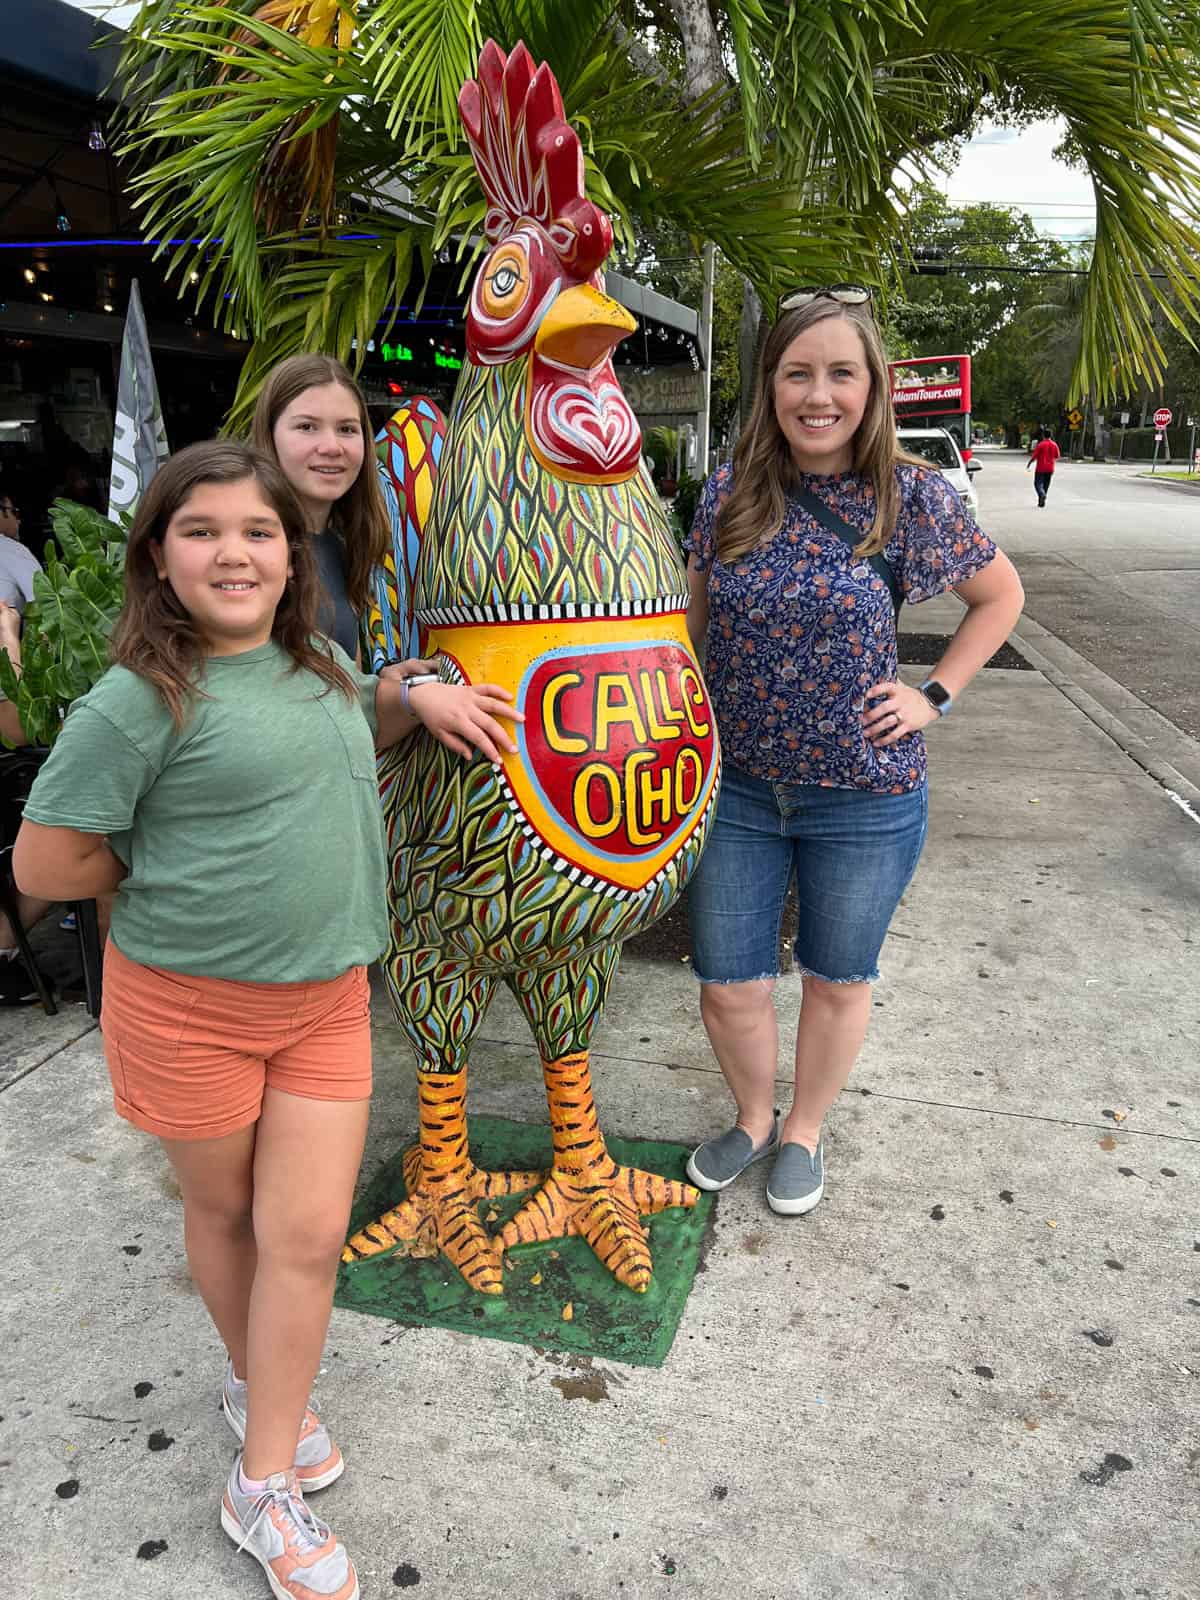 An image of a mom and kids in front of one of the Calle Ocho roosters in Little Havana, Miami, Florida.